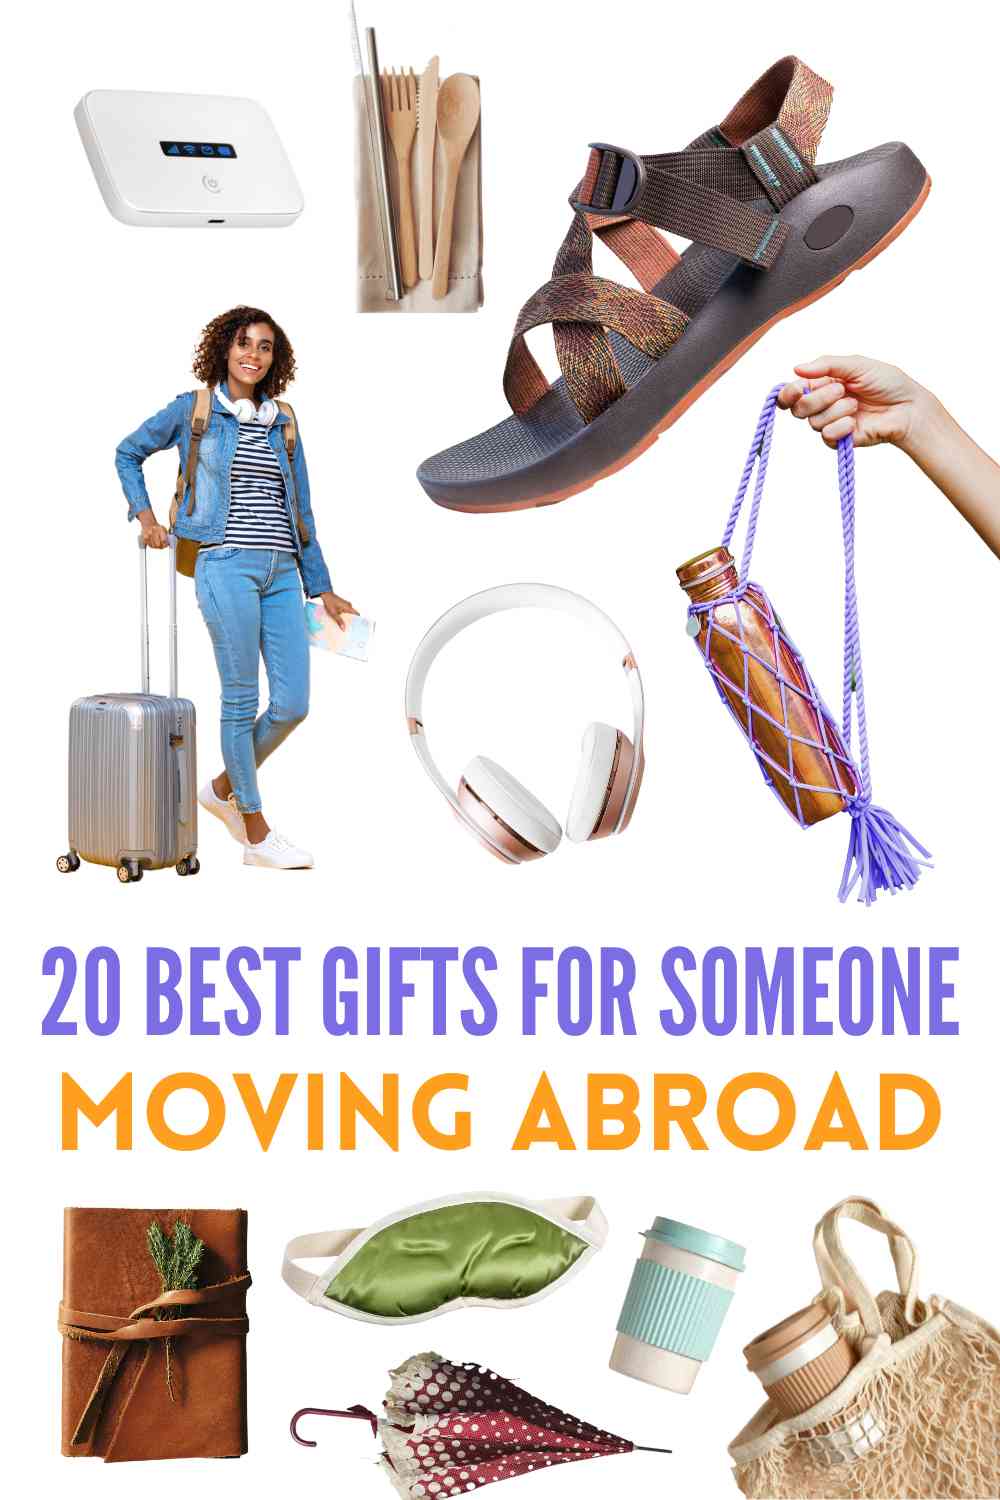 20 Best Gifts For Someone Going Abroad - Your Guide To Picking Practical  Presents